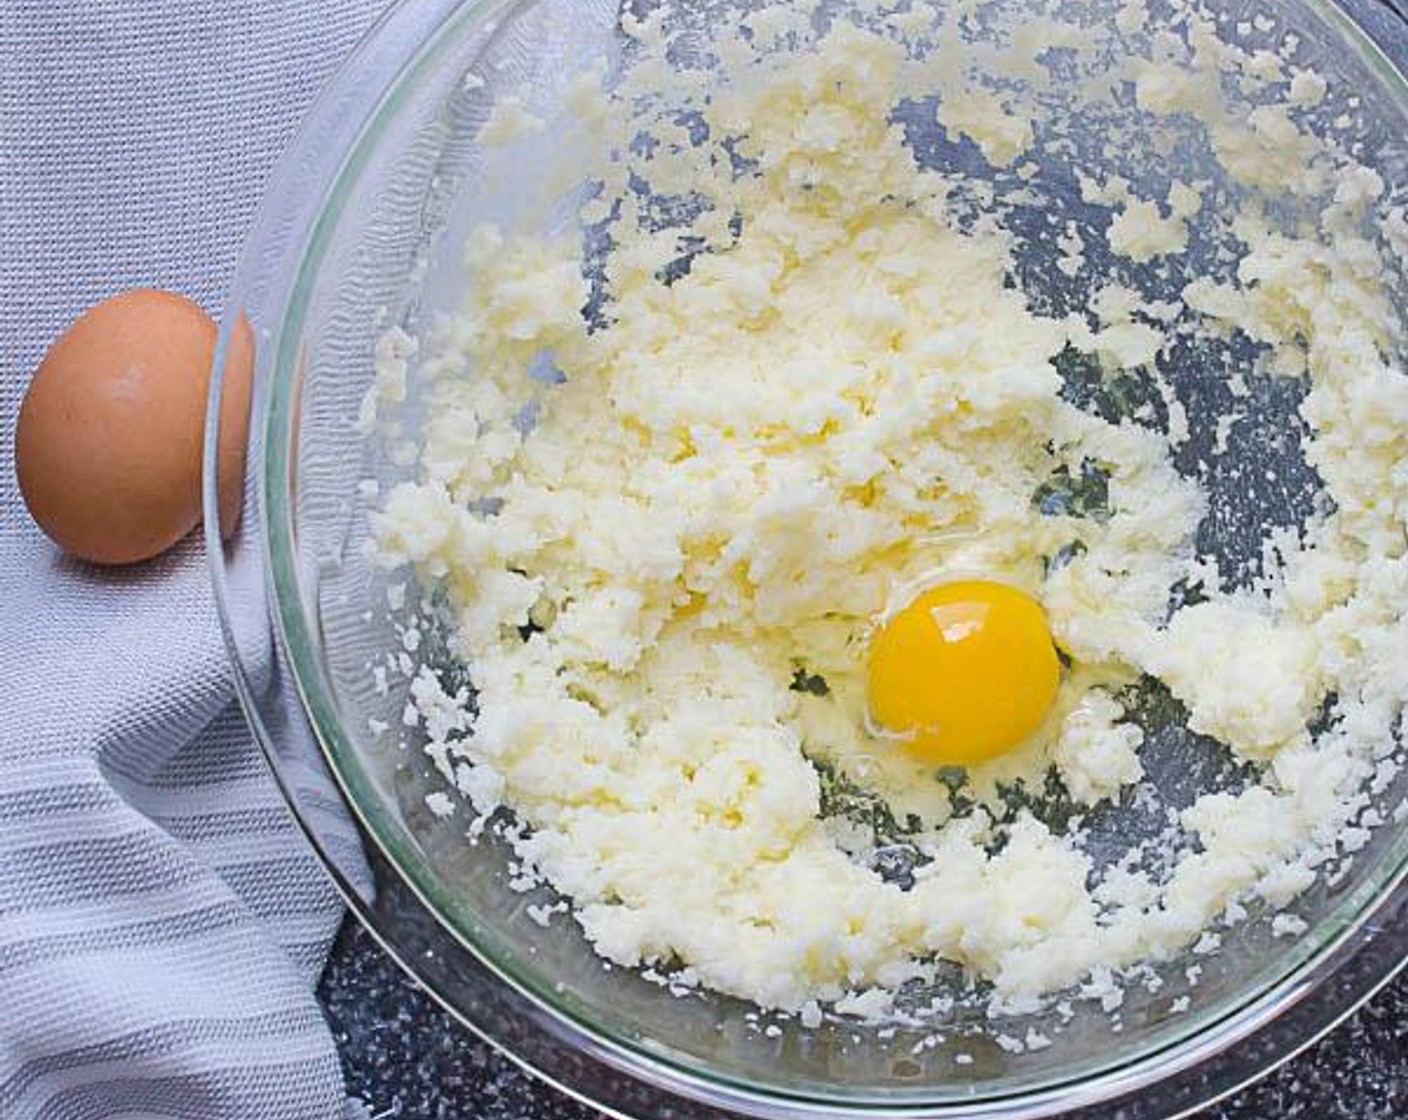 step 4 In a large bowl beat together the Granulated Sugar (1 cup) and Butter (1/2 cup) for 1 to 2 minutes on medium-high speed until fluffy and well incorporated. Beat the Eggs (2) in one at a time, scraping the sides of the bowl with a spatula occasionally.